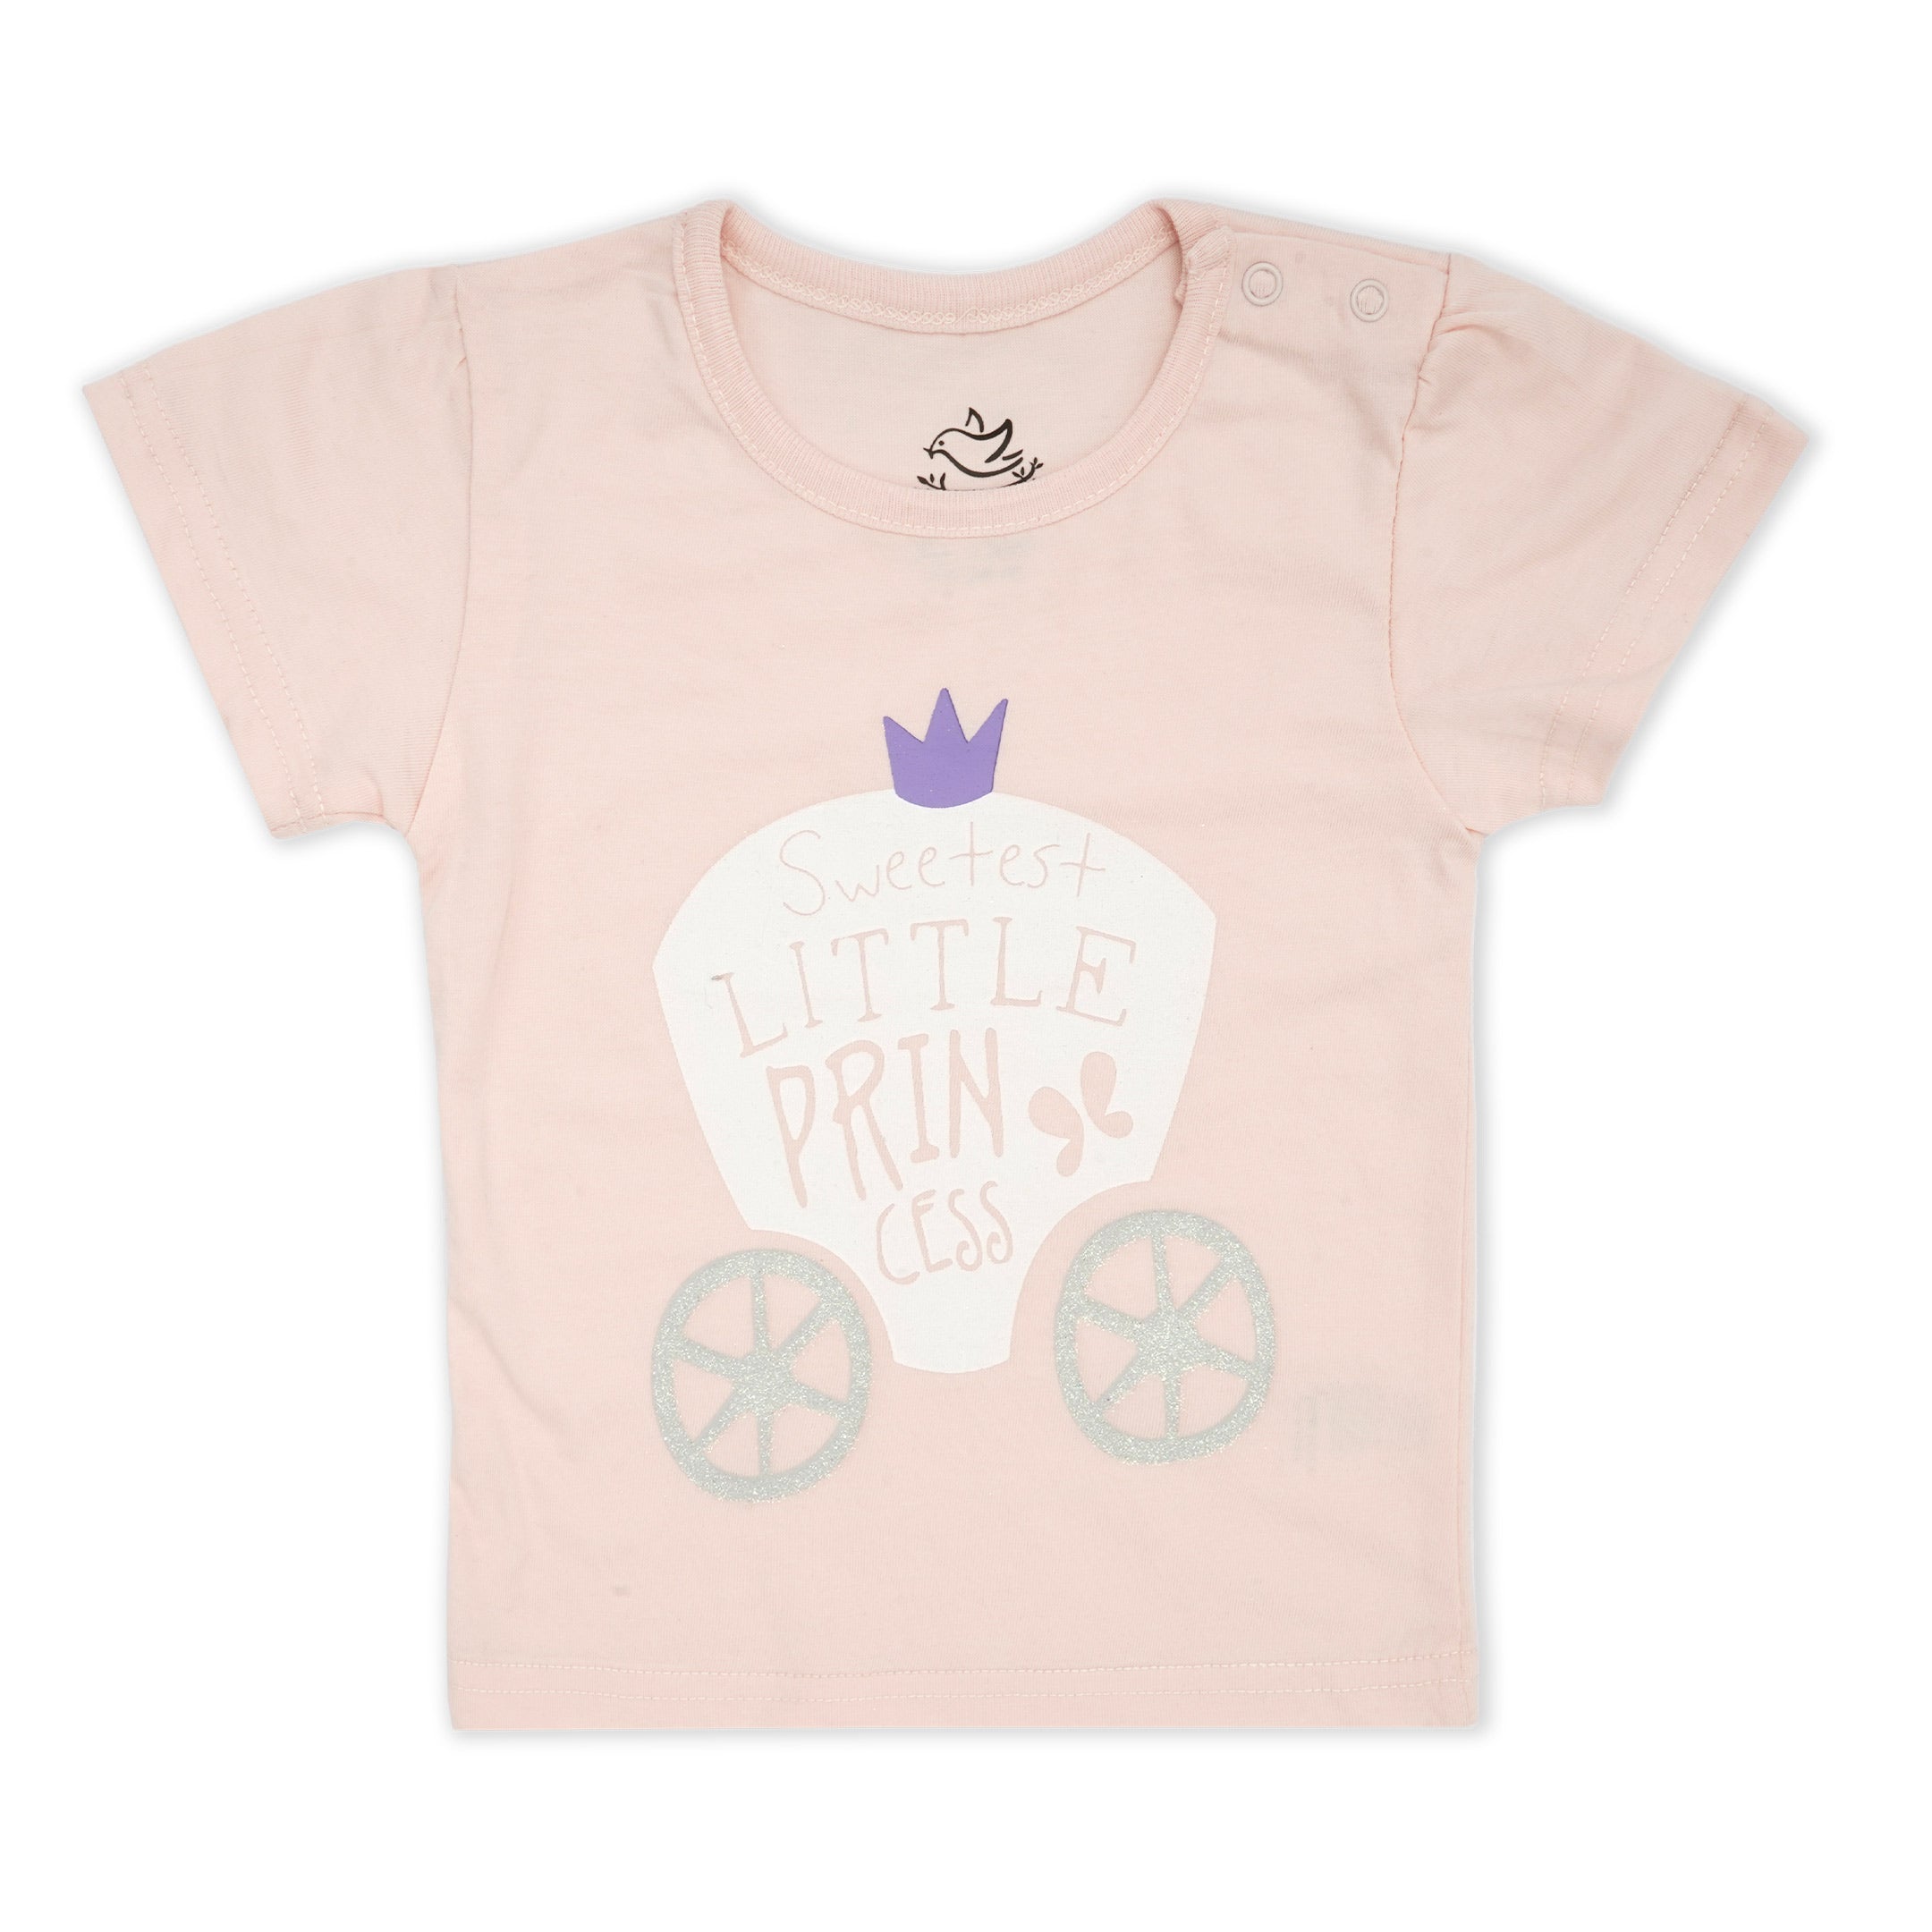 The Baby Tees (3PC Pack)